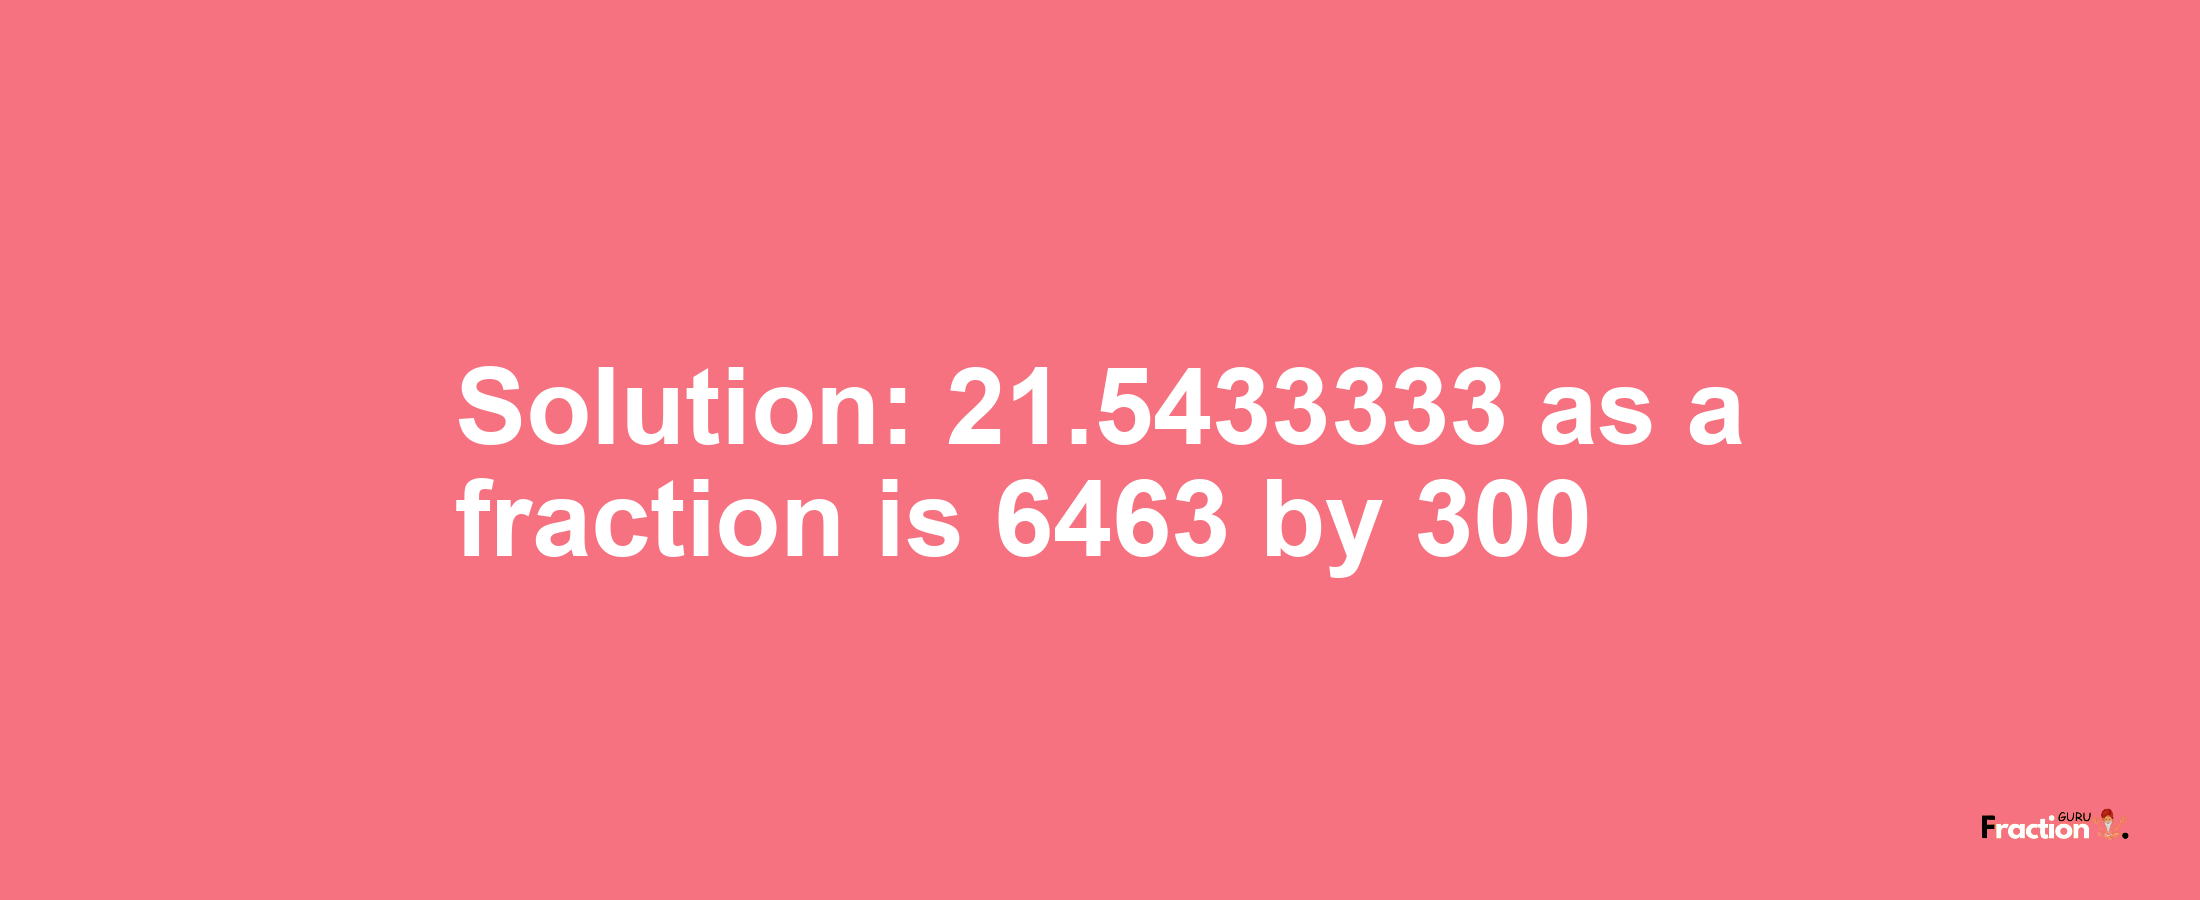 Solution:21.5433333 as a fraction is 6463/300